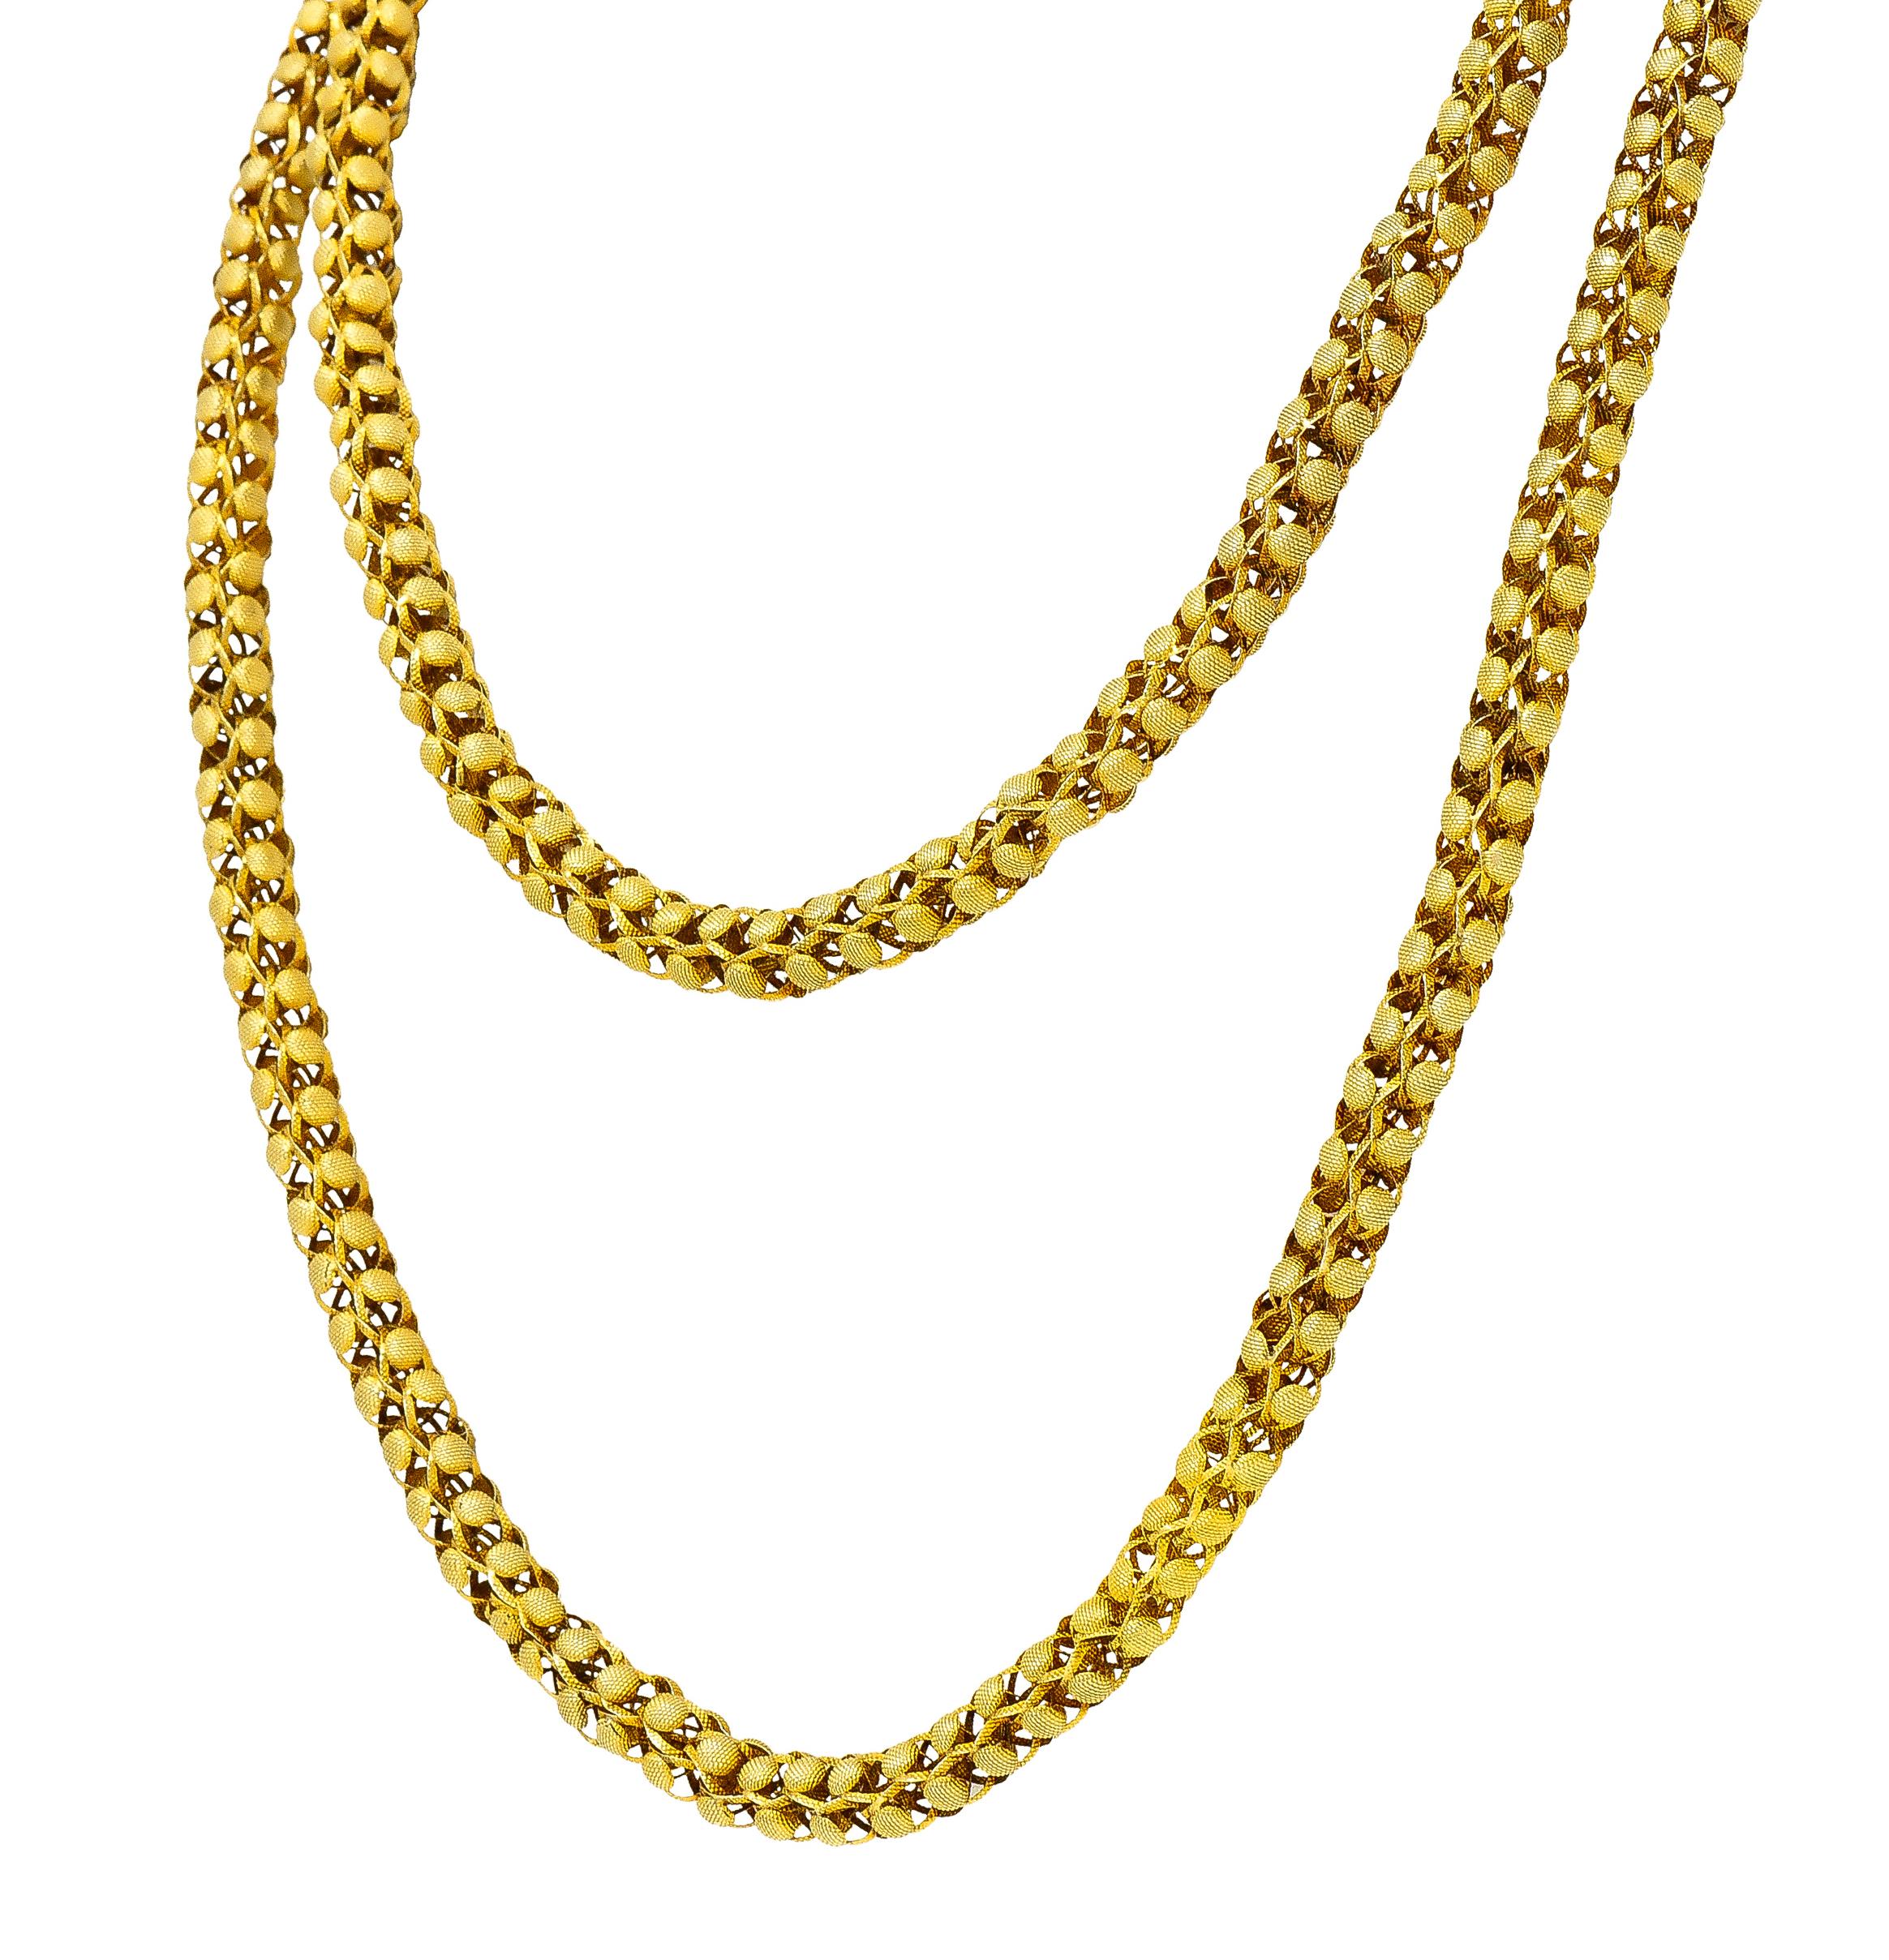 Women's or Men's Georgian 18 Karat Yellow Gold Floral Dome Byzantine 46 Inch Long Chain Necklace